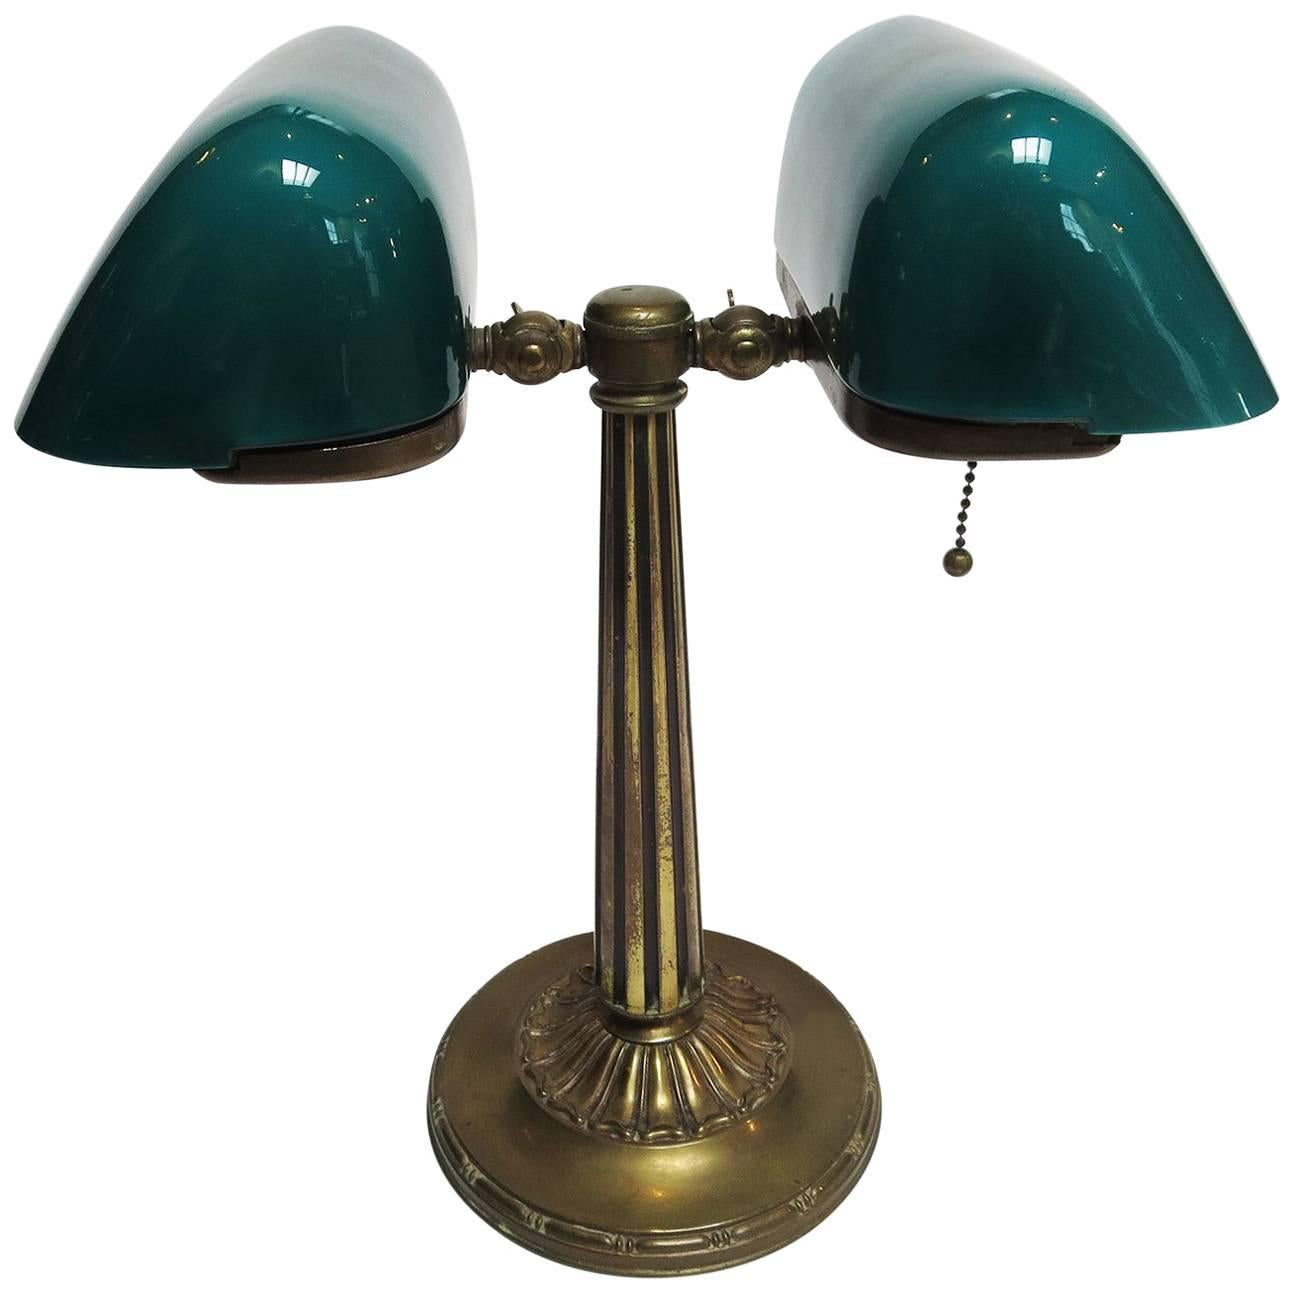 Emeralite 8734 Series Double Library Desk Lamp in Brass and Glass, Rewired